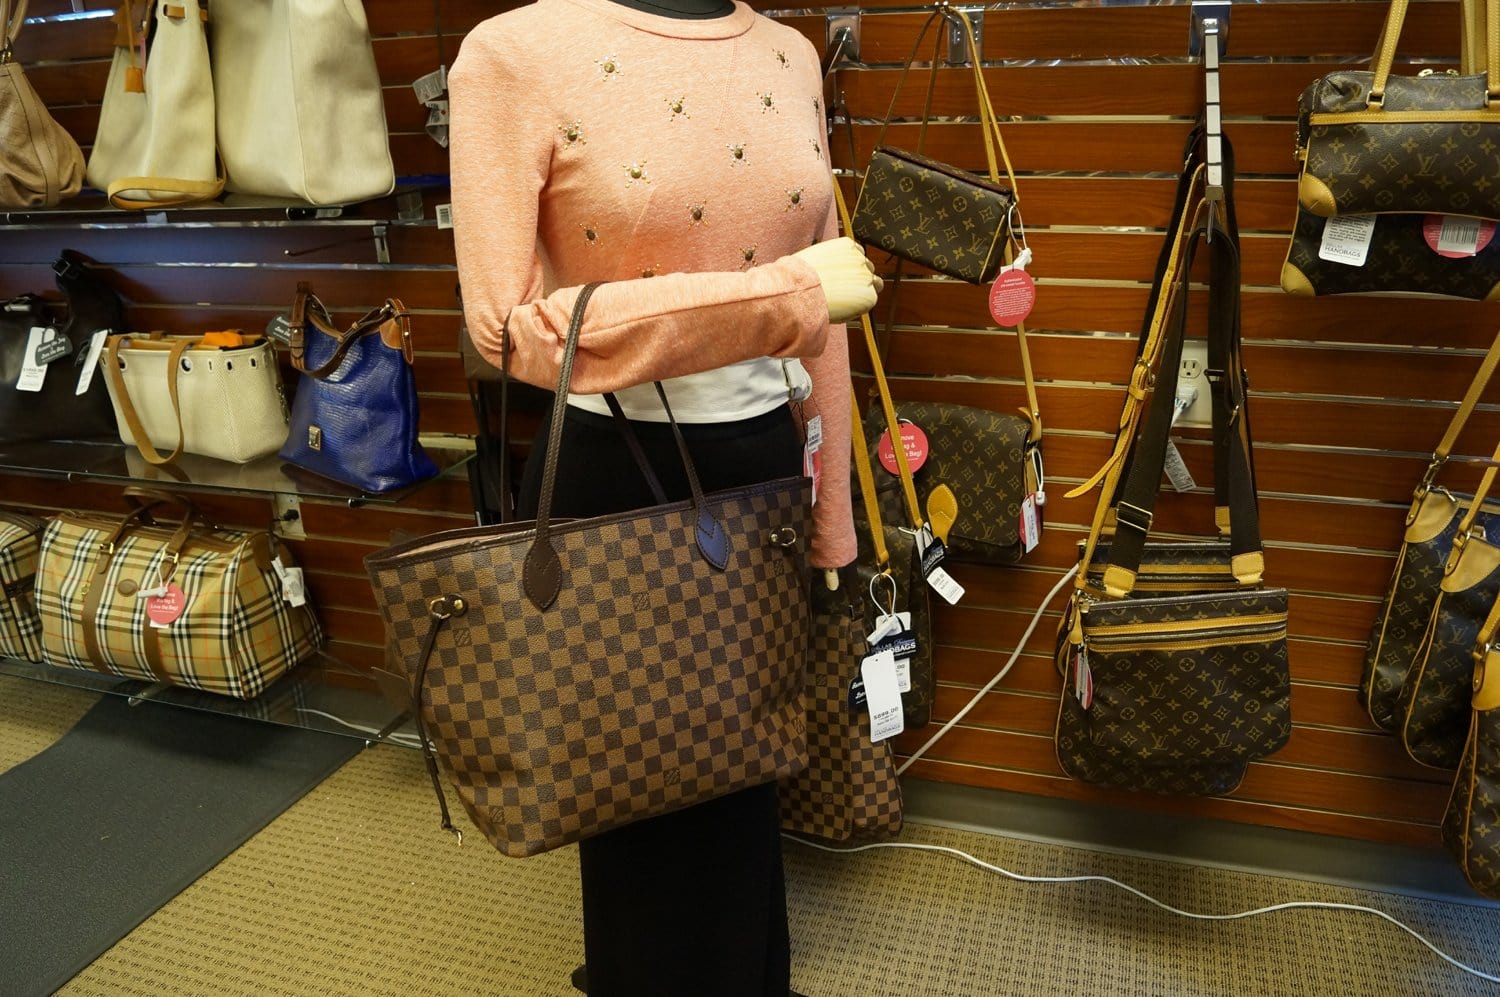 Louis Vuitton Neverfull MM Brown Damier Ebene Canvas Tote W/Pink